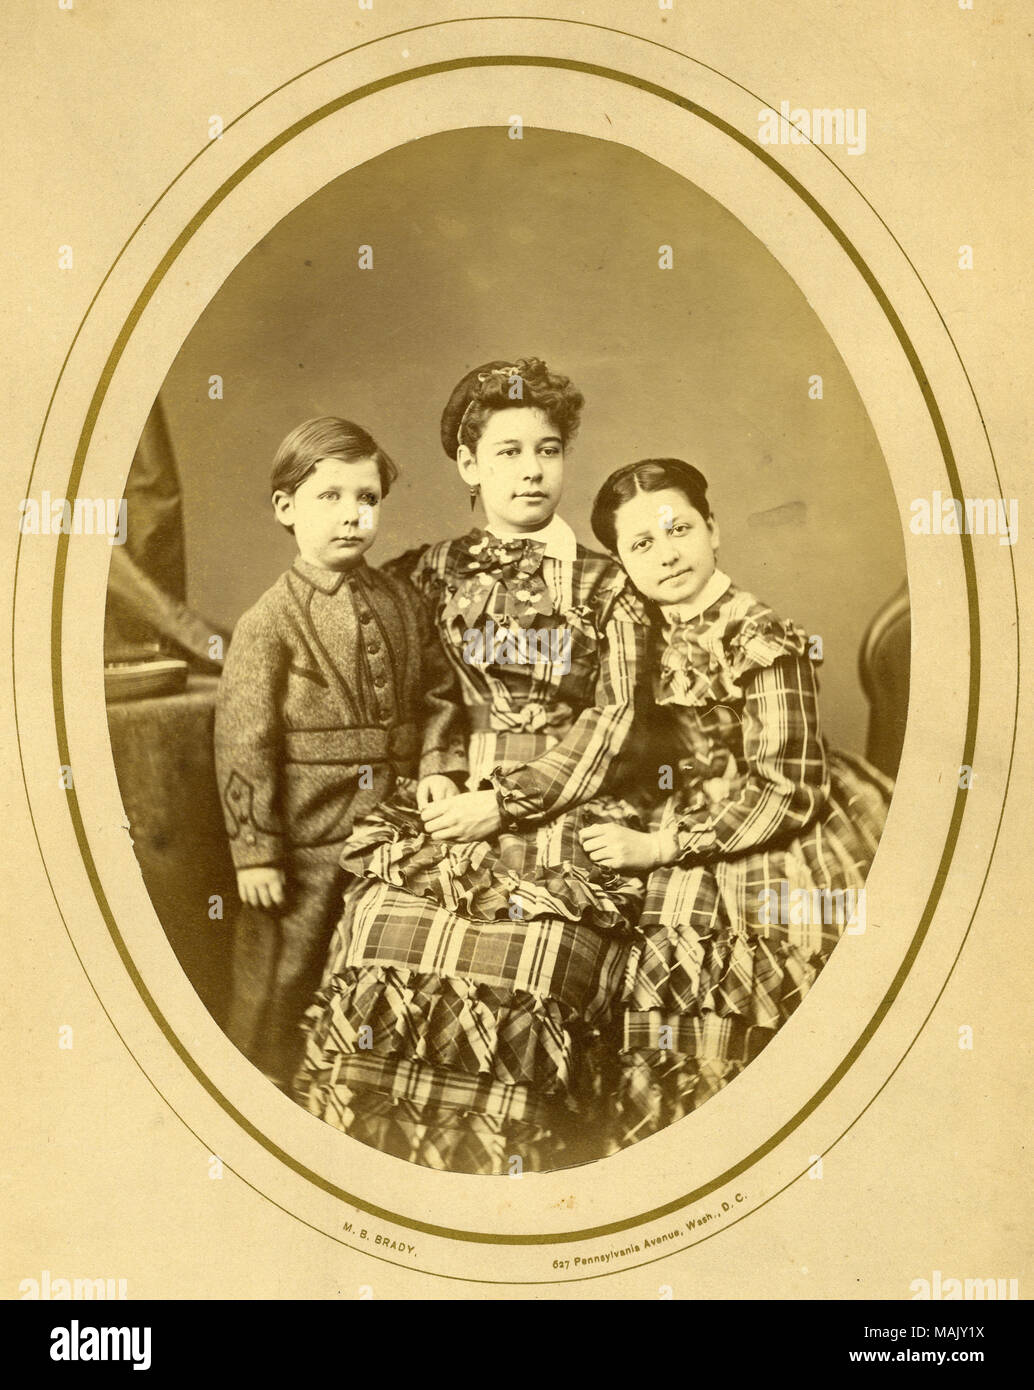 Group portrait of Fannie age 12, Emlie age 14, and Johnson age 5years-8 months. Girls are wearing matching plaid dresses with ruffles and bows and Johnson is wearing a military tailored one piece wool suit with braid and button. Title: Children of Hamilton Fant: Fannie, Emlie and Johnson Fant.  . circa 1860s. Mathew Brady, Washington D.C. Stock Photo